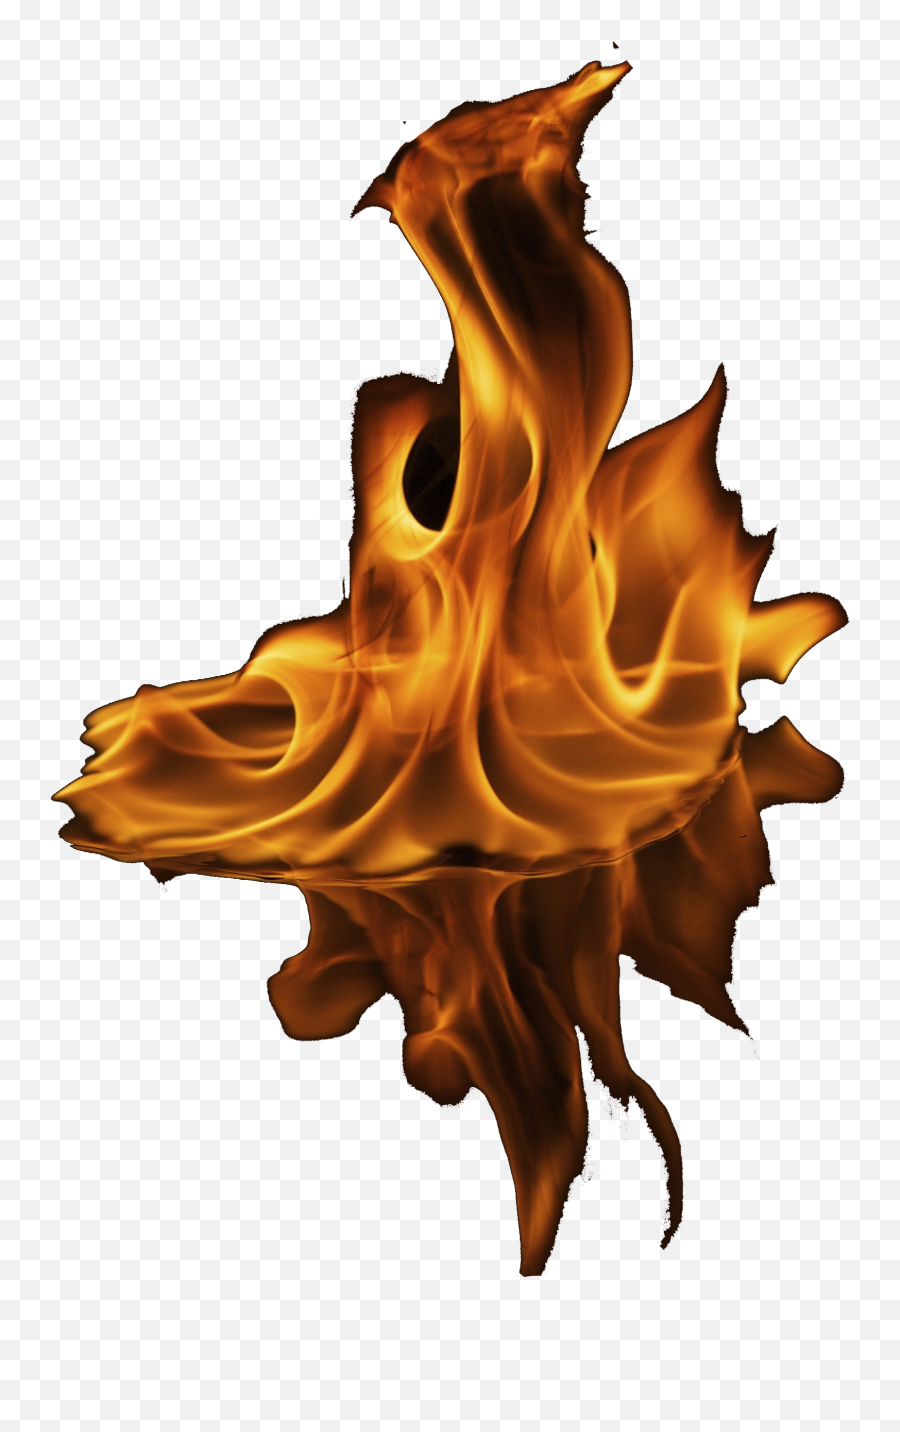 Backgrounds Png Hd Picture - Flame,Fire Background Png